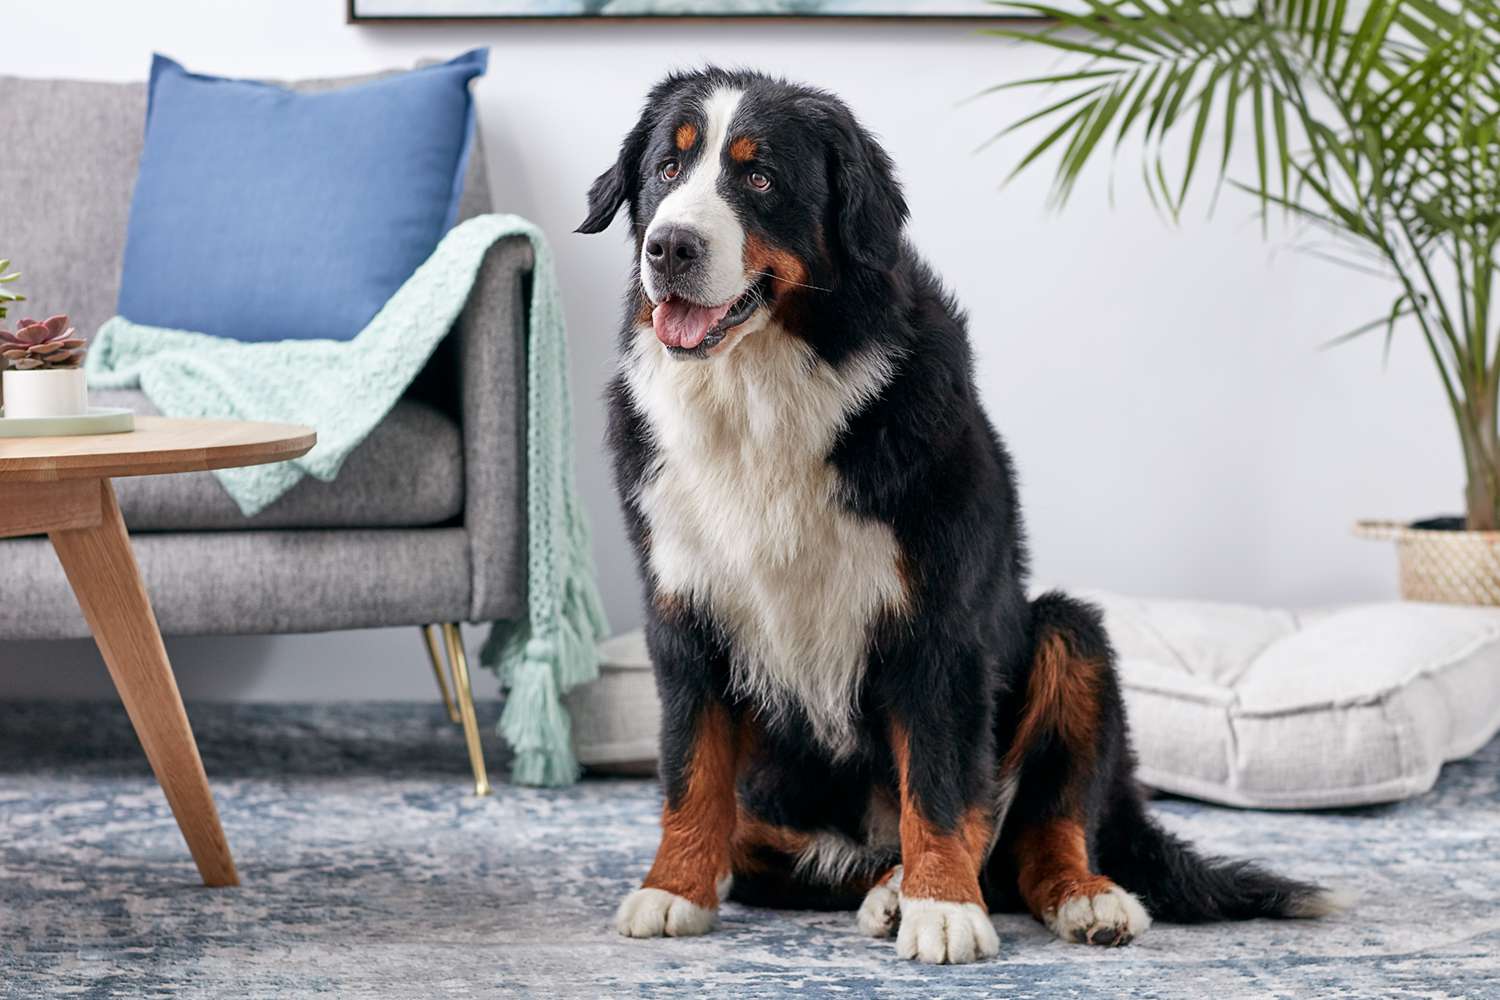 A Bernese Mountain Dog sitting on a rug